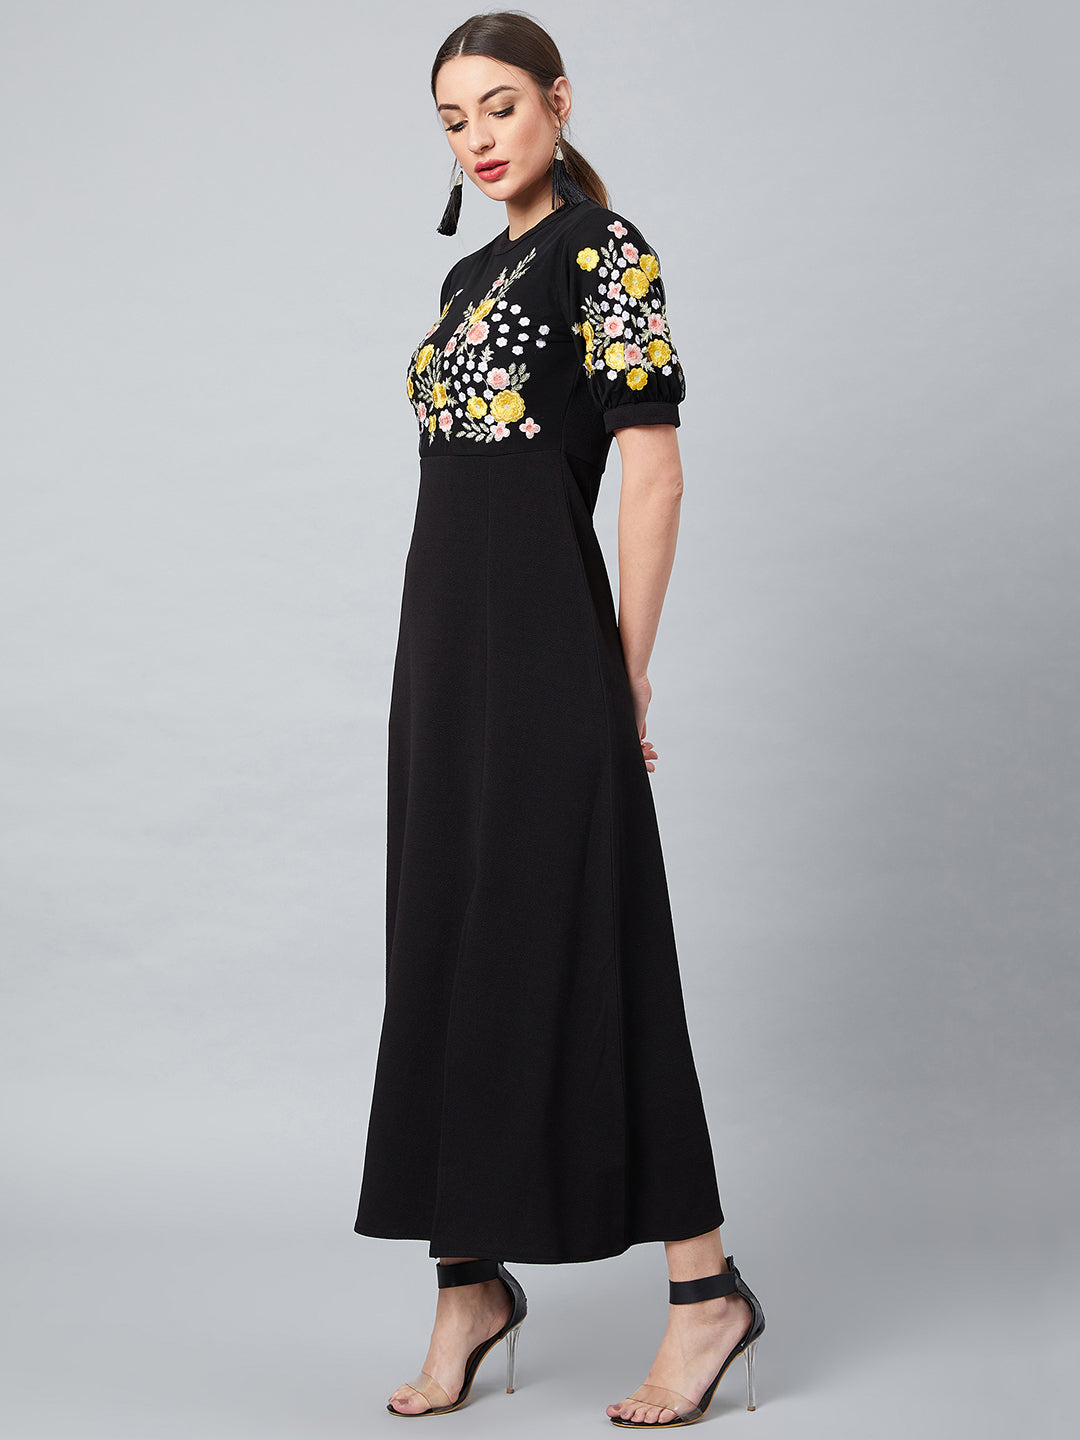 Athena Black 100% Polyester Embroidered Fit and Flare Dress - Athena Lifestyle